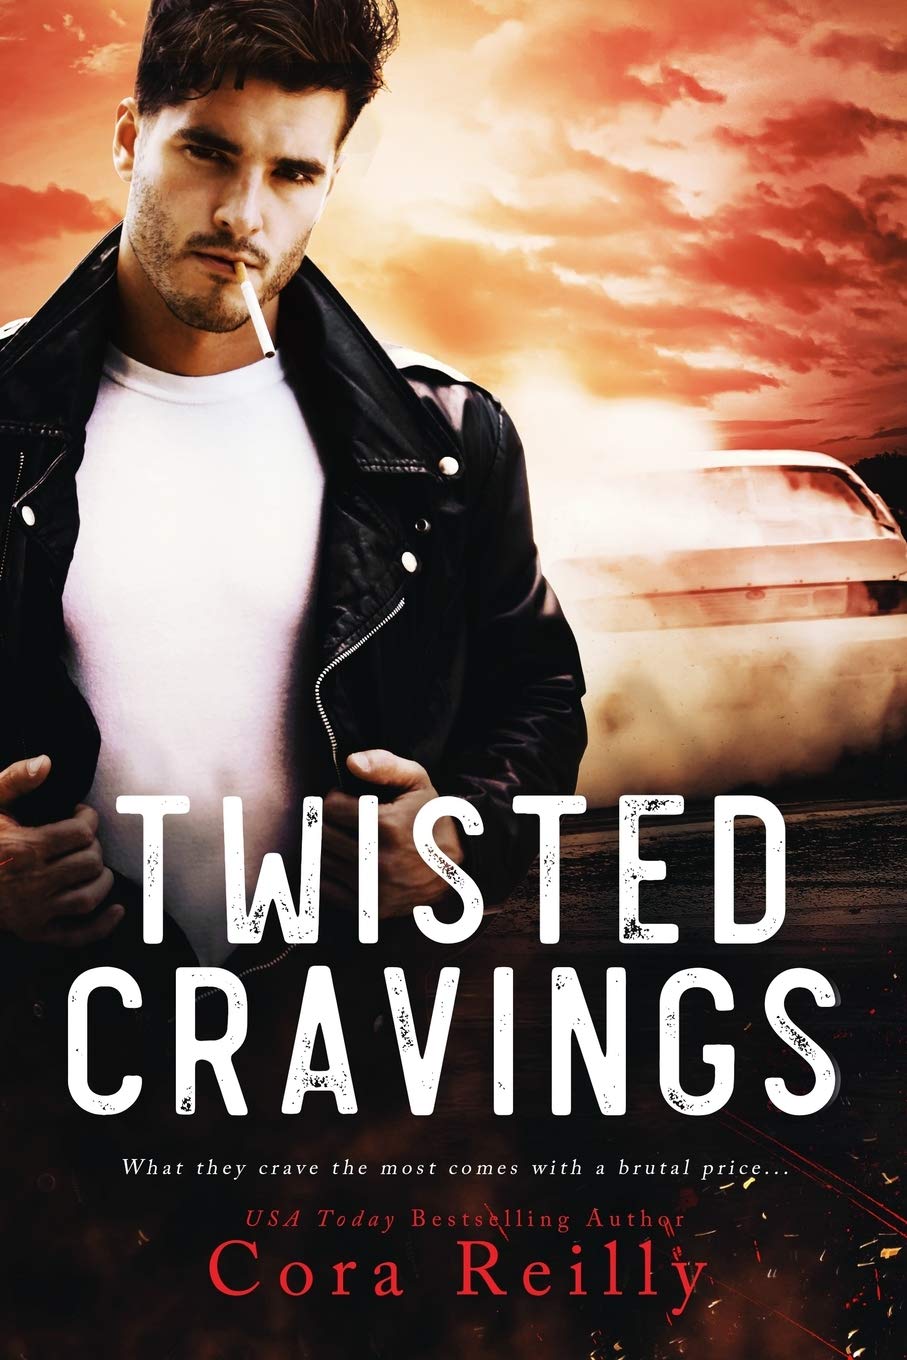 [EPUB] The Camorra Chronicles #6 Twisted Cravings by Cora Reilly